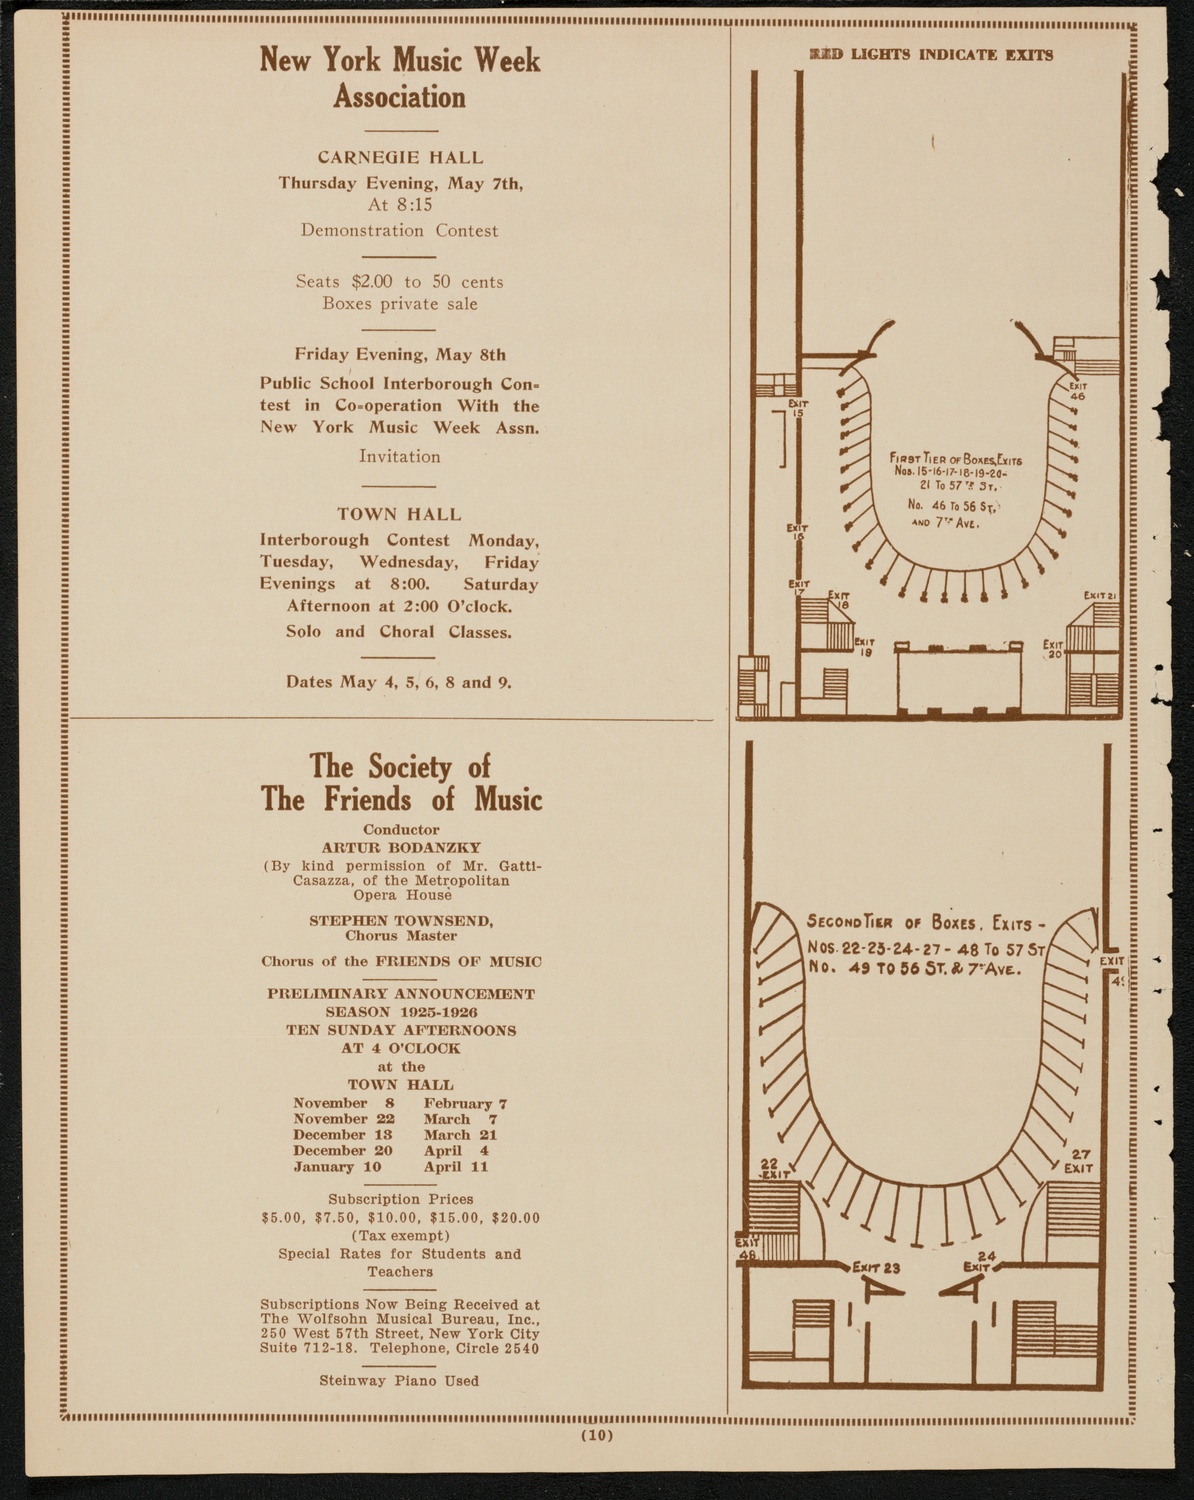 May Day Festival, May 1, 1925, program page 10